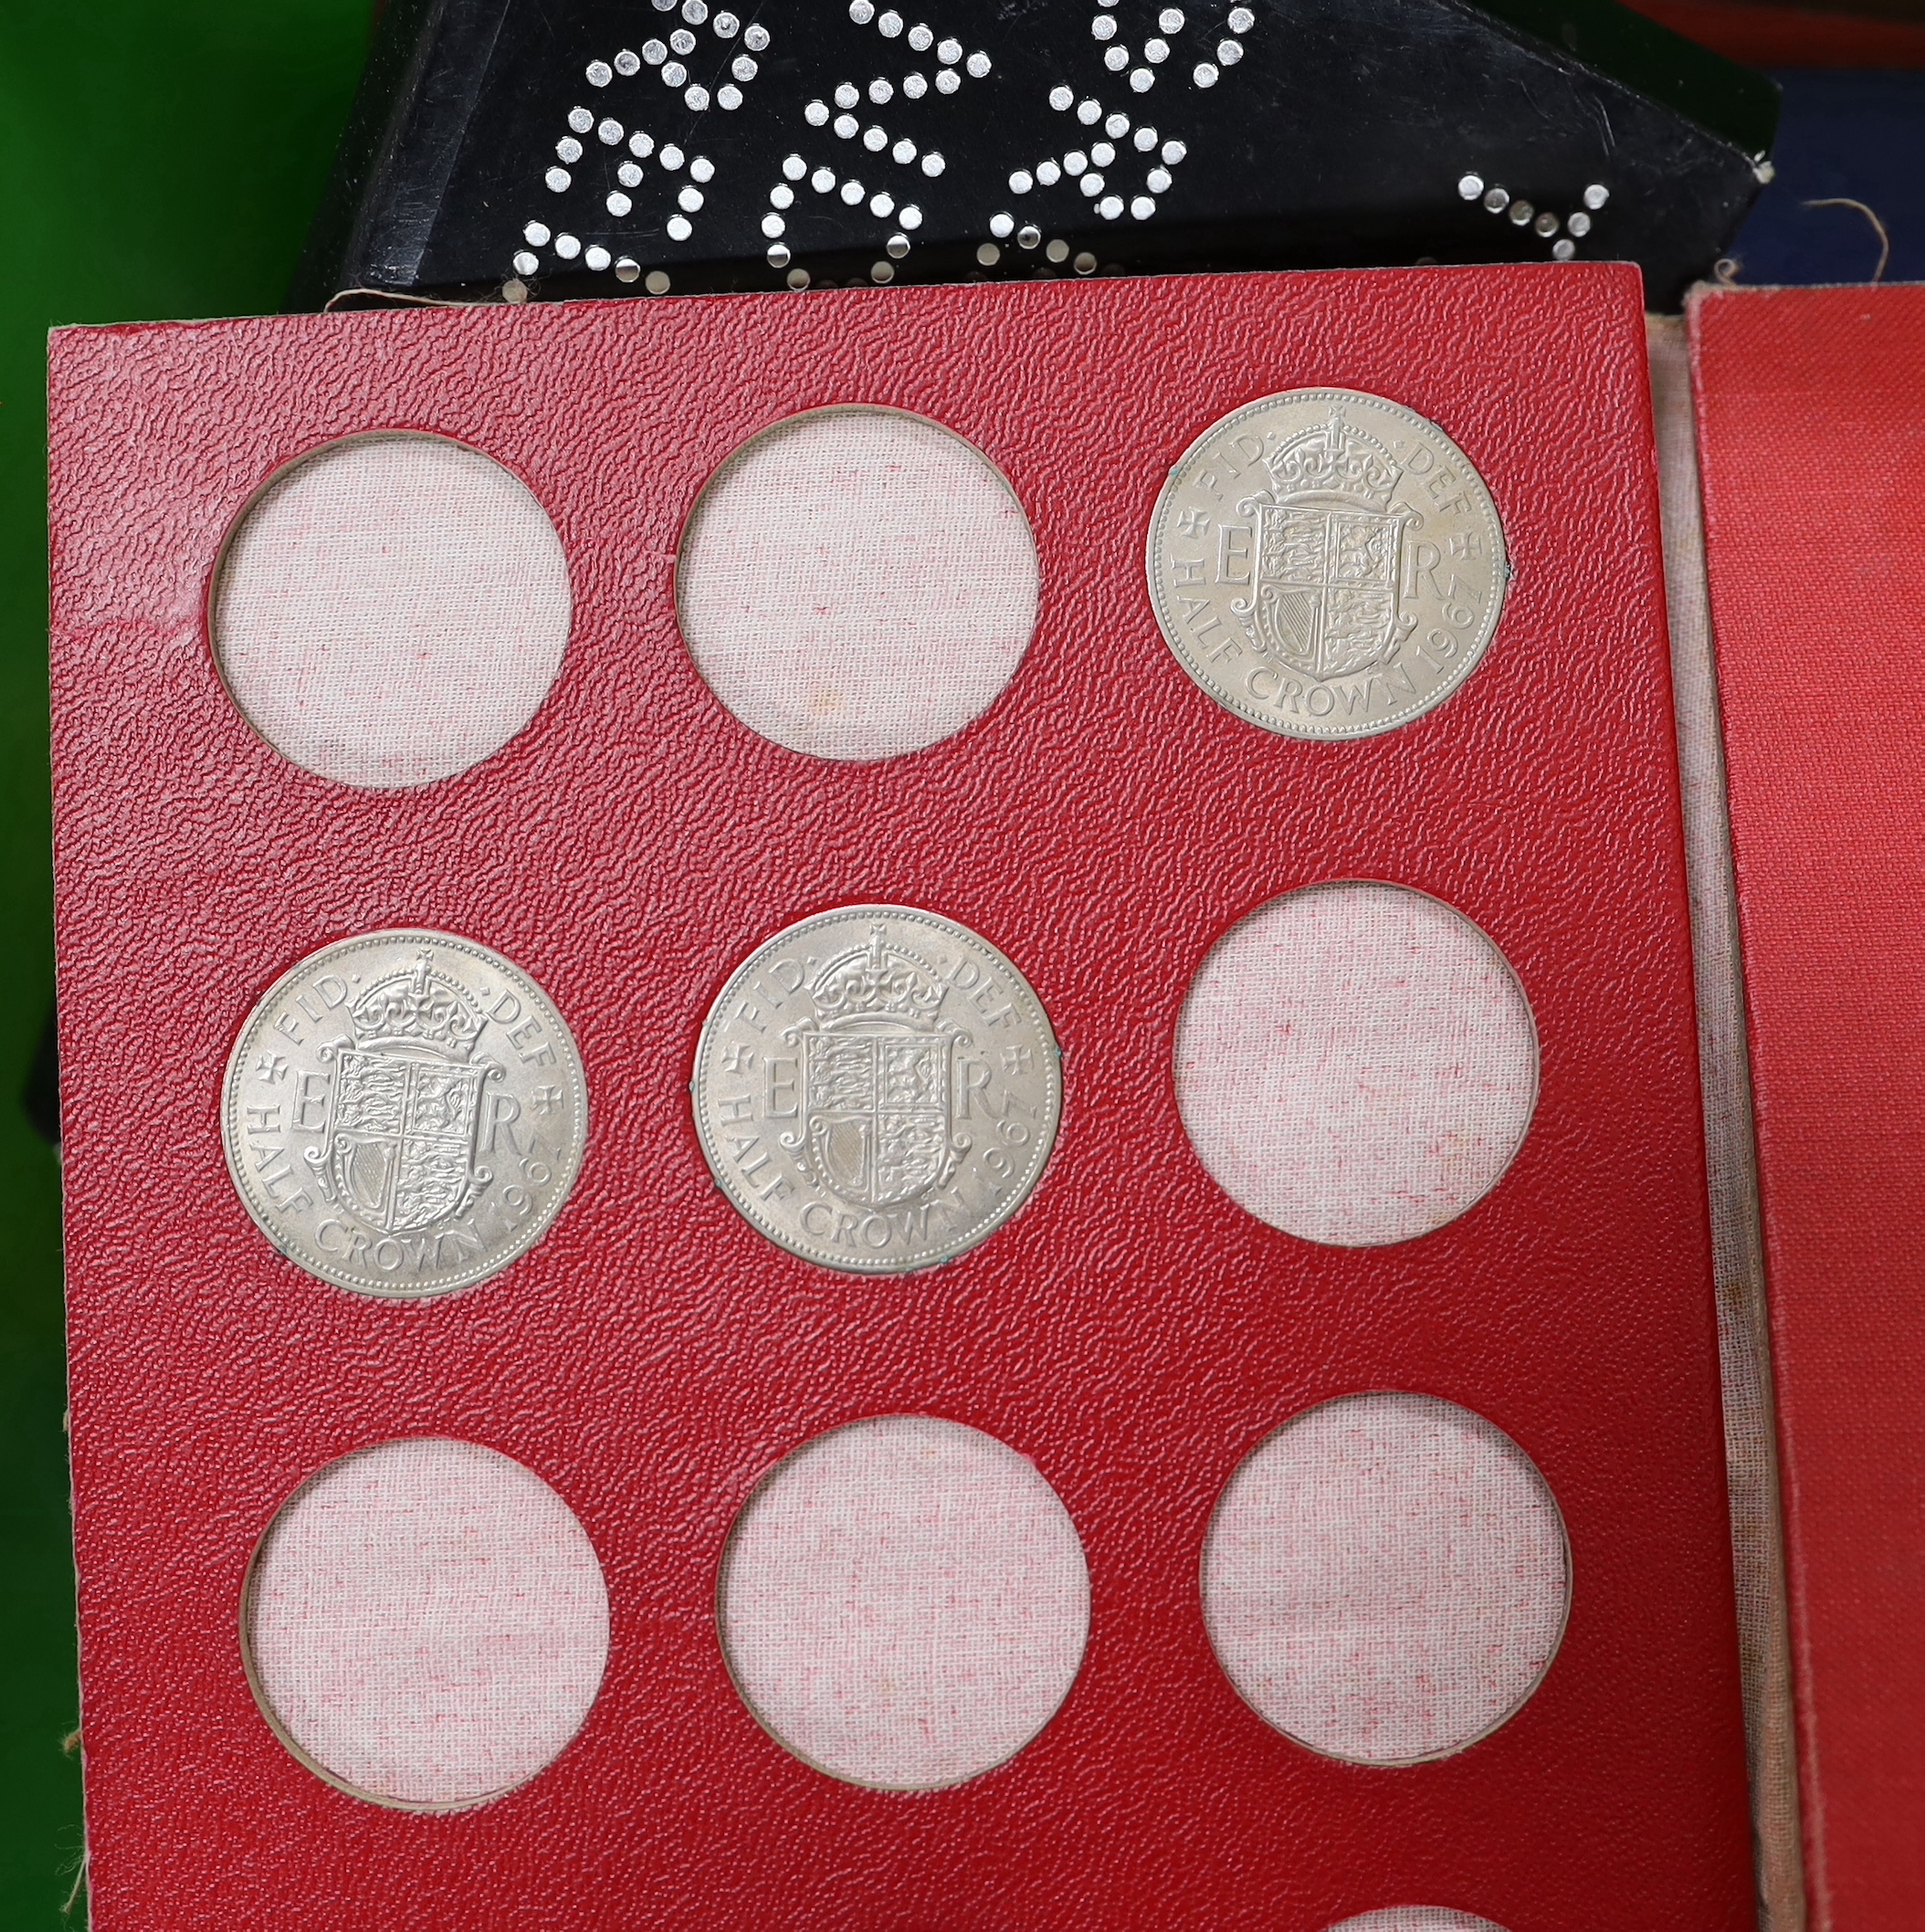 Commonwealth coins and George V to QEII coins including commemorative crowns etc, one box